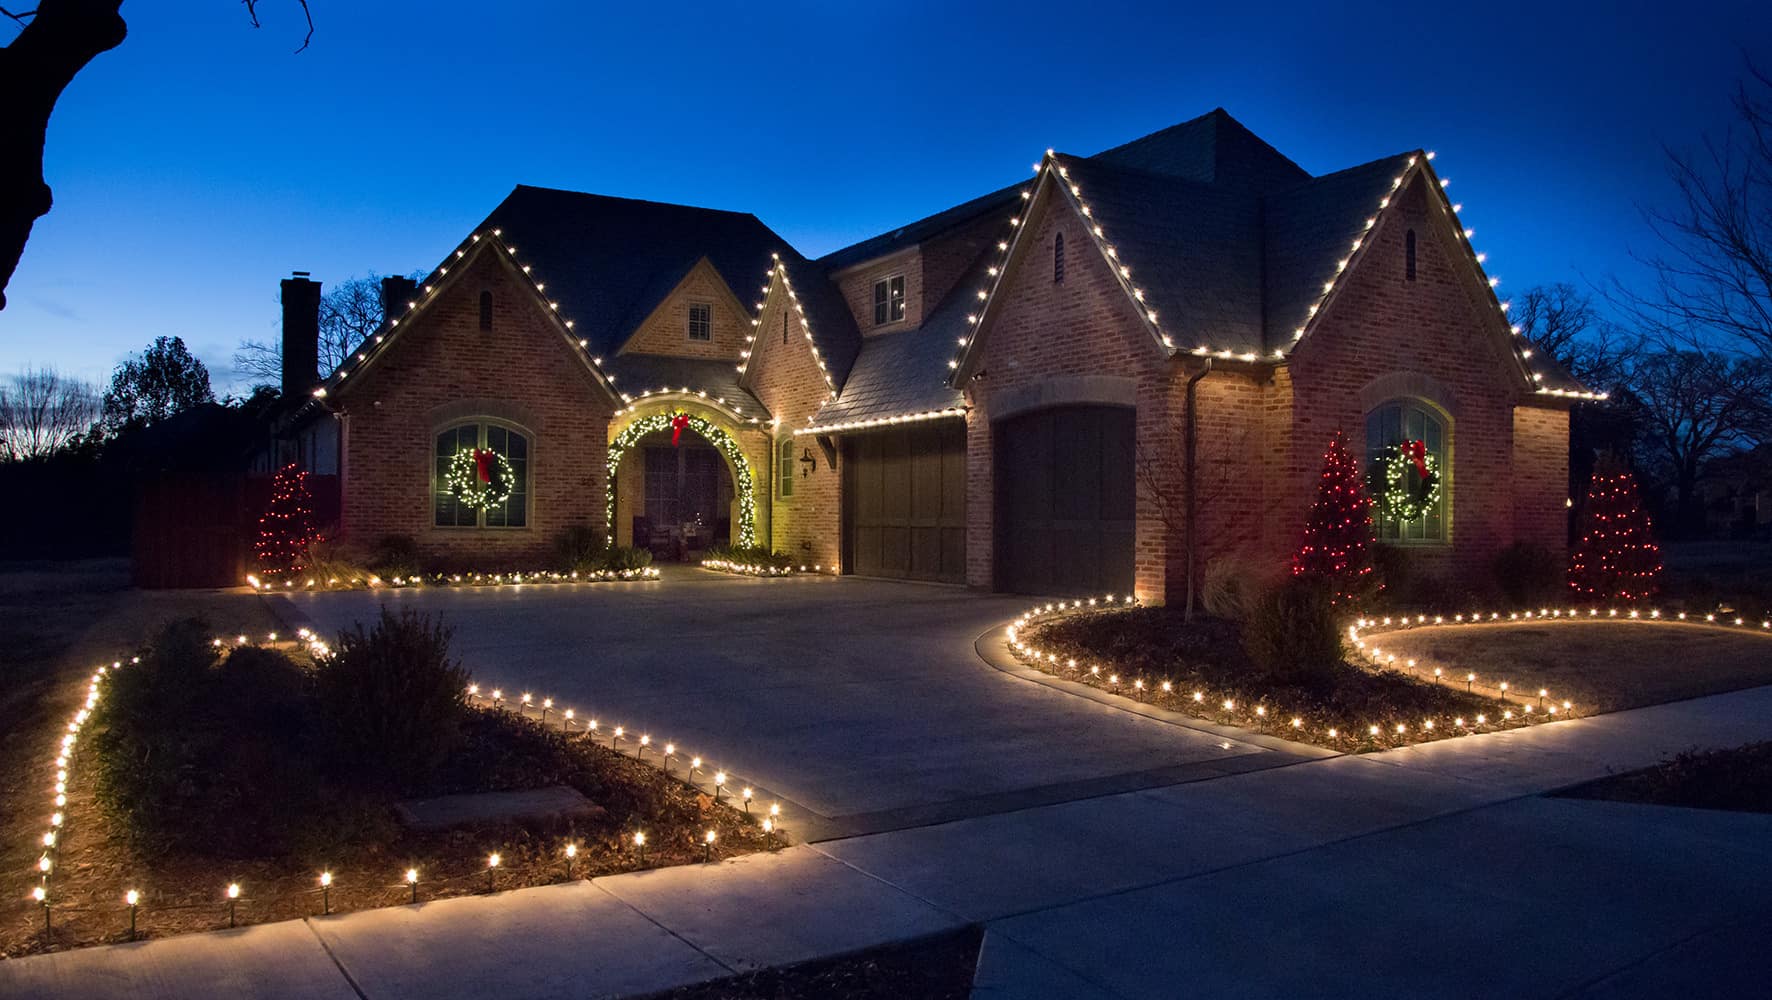 HOW TO START A CHRISTMAS LIGHT INSTALLATION BUSINESS